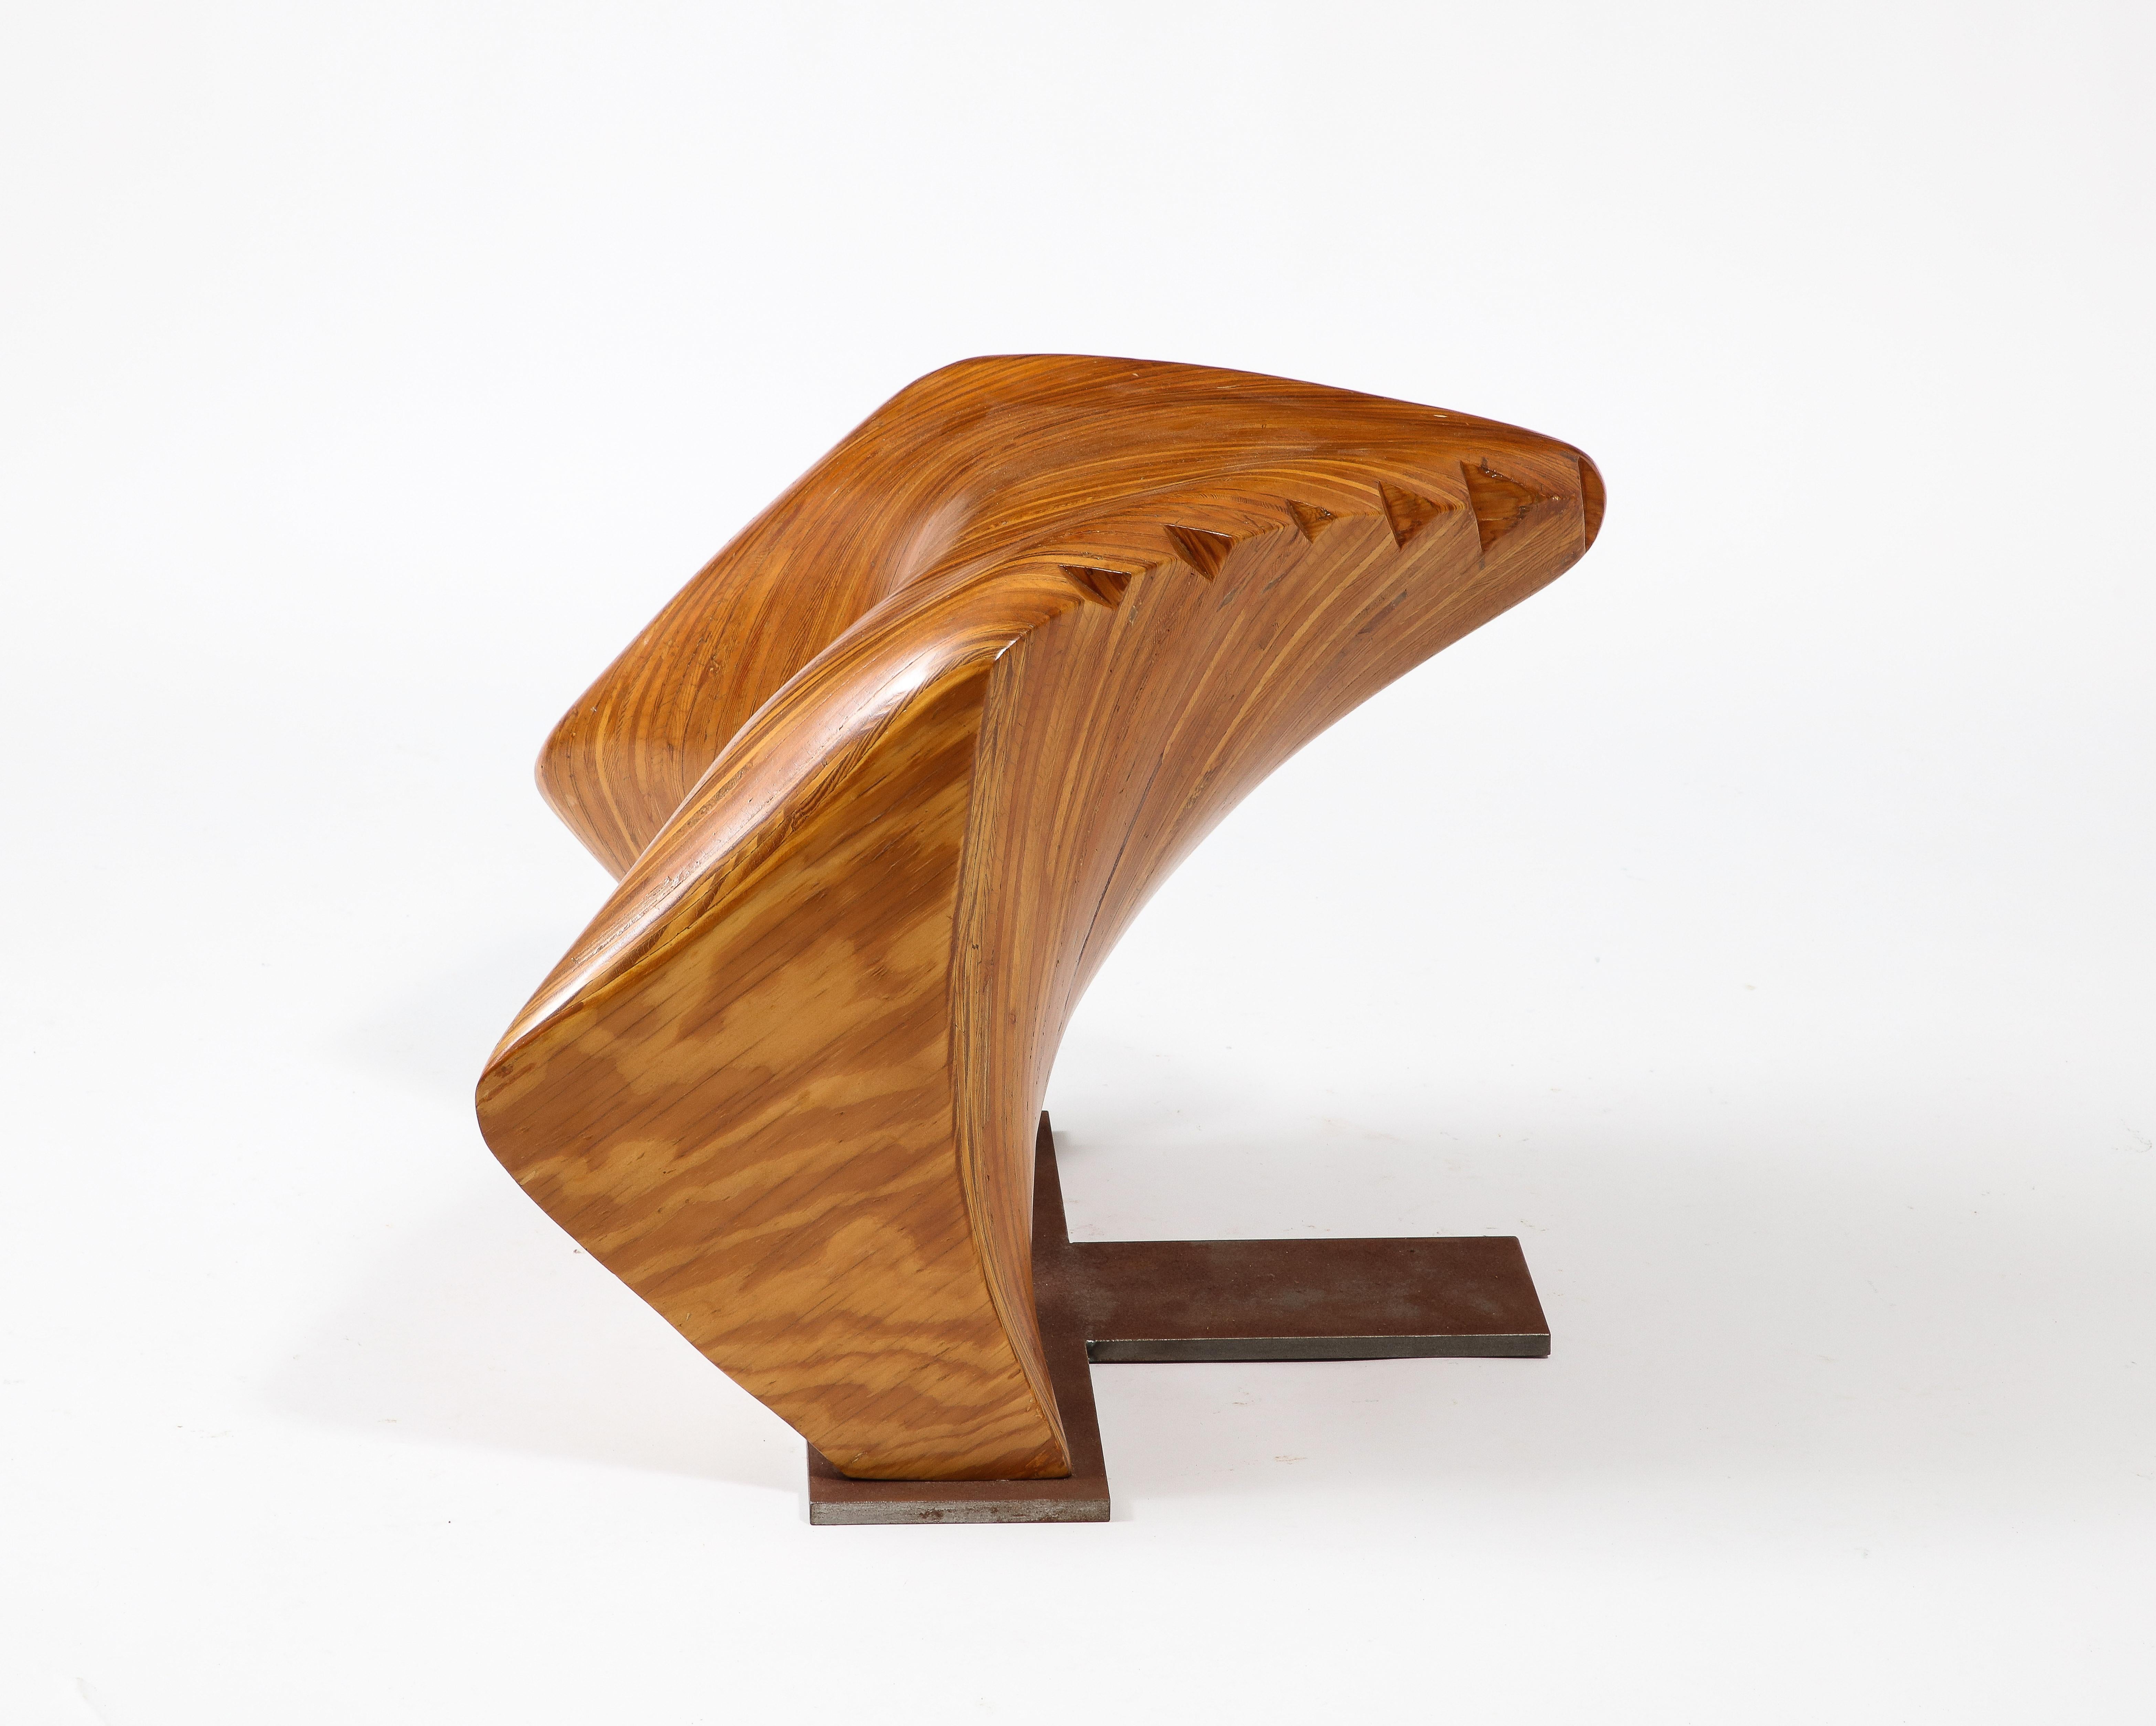 American Sculptural Laminated Wood Object or Stool, USA 1960's For Sale